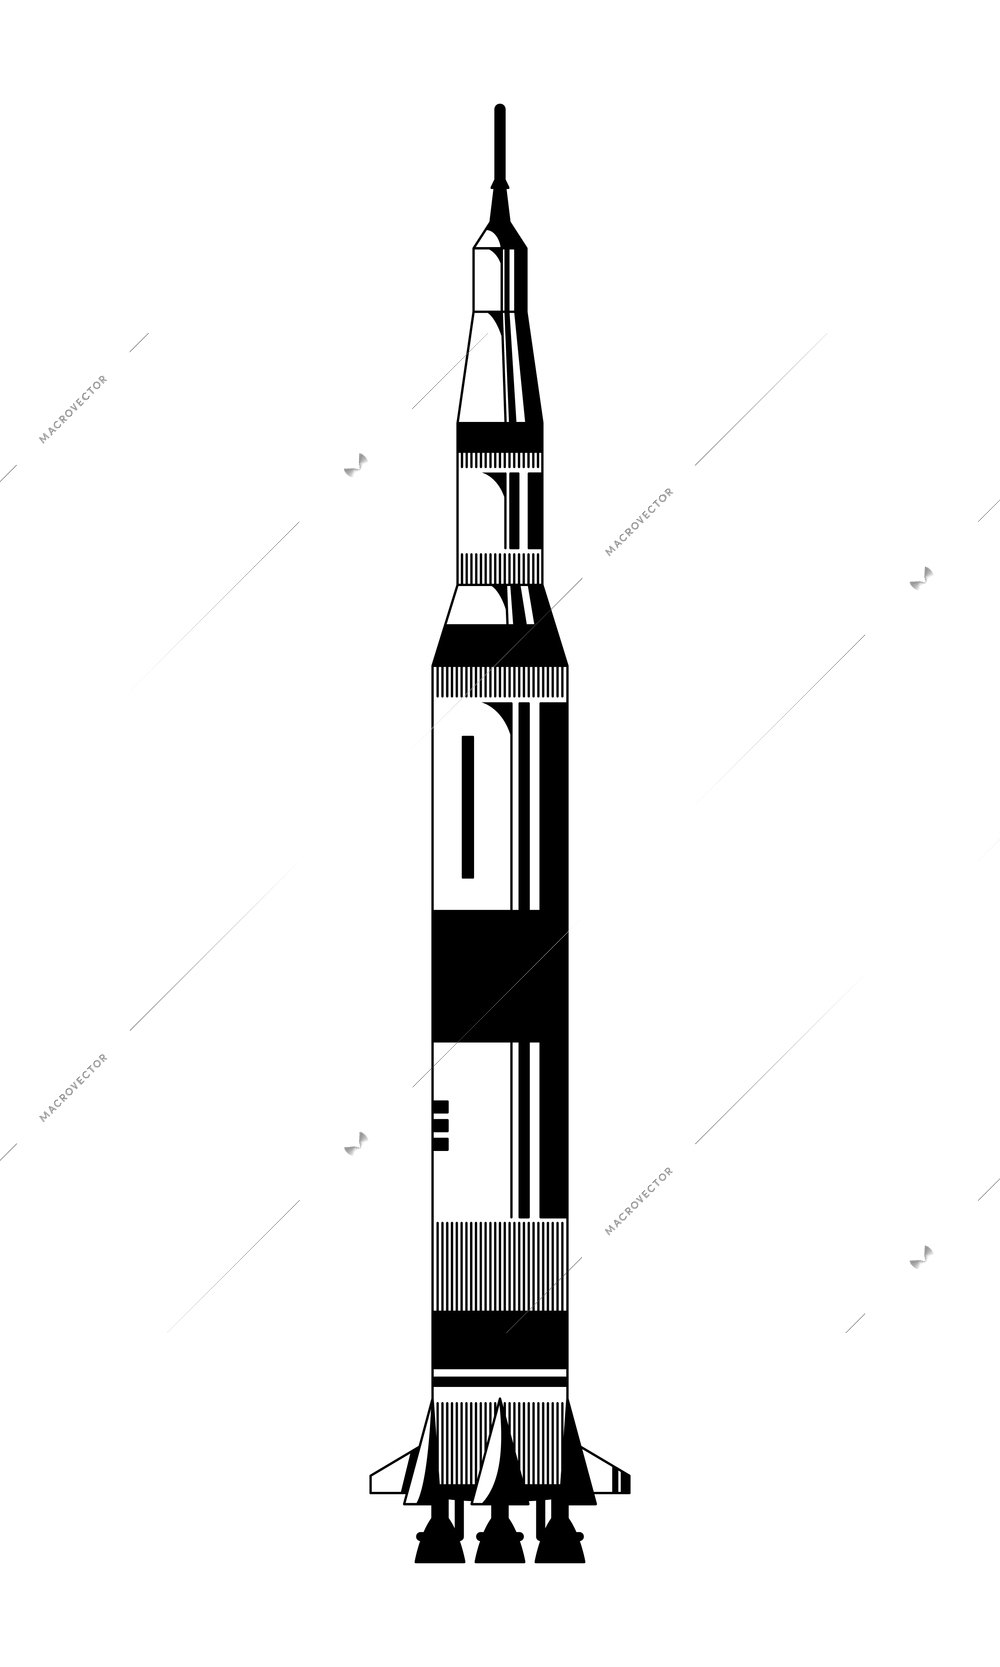 Space engraving hand drawn composition with isolated image of rocket on white background vector illustration